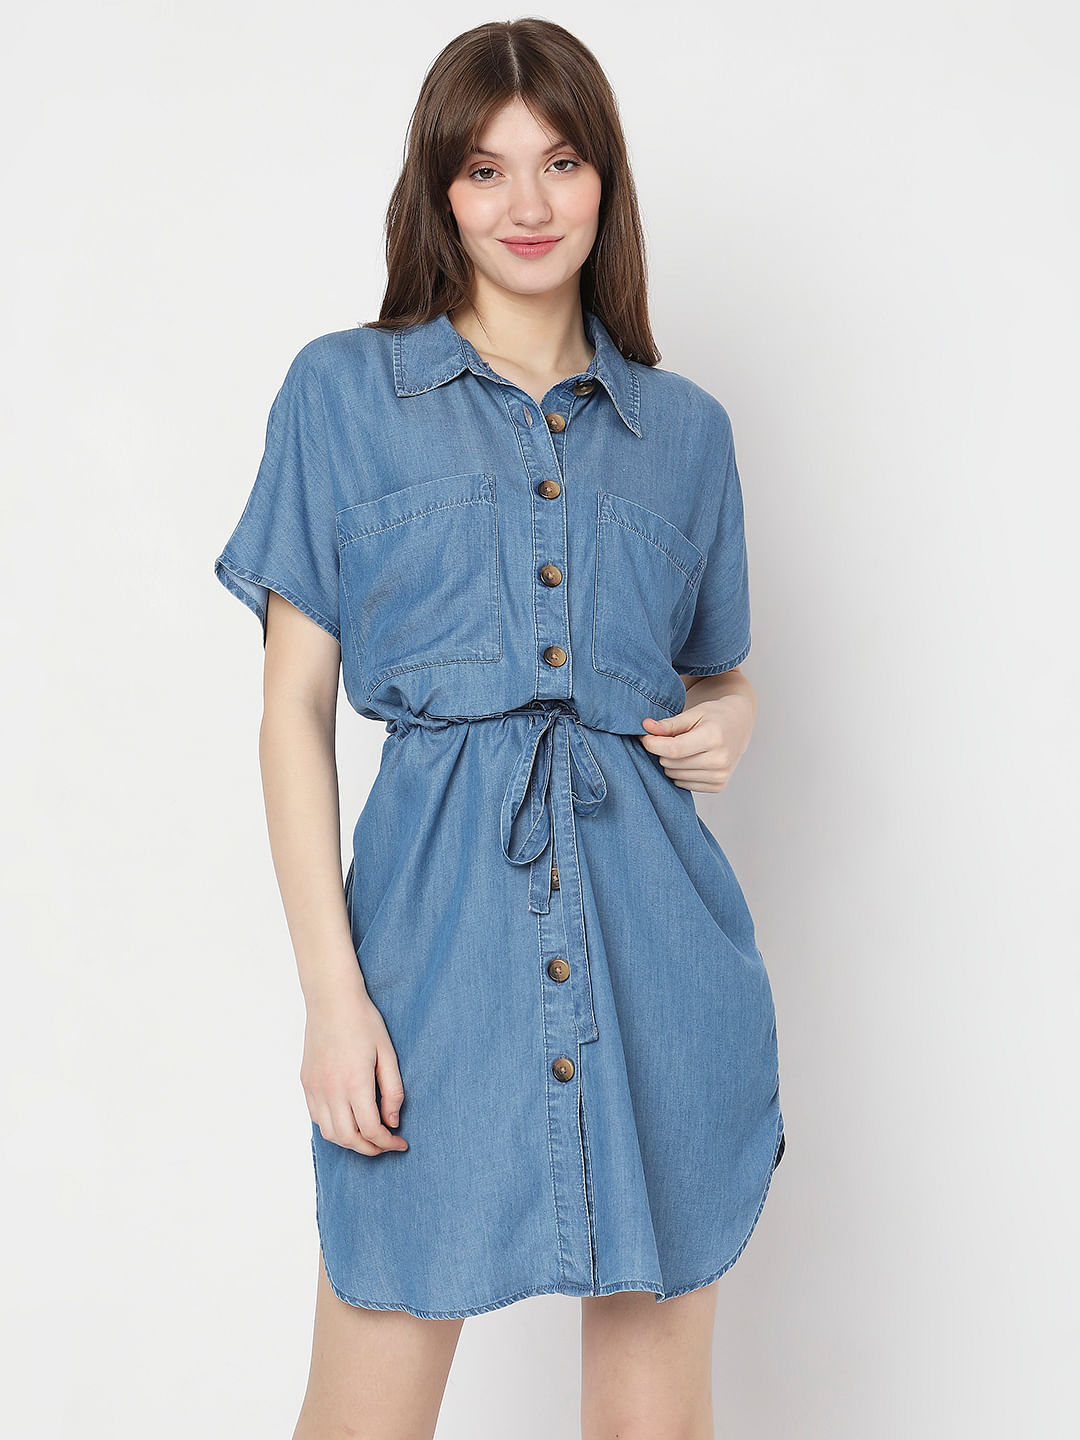 How to Style Long Sleeve Denim Shirt Dress for Spring w. Large Braided  Belt. Spring Outfit Ideas. | Denim fashion, Denim dress outfit, Denim dress  fall